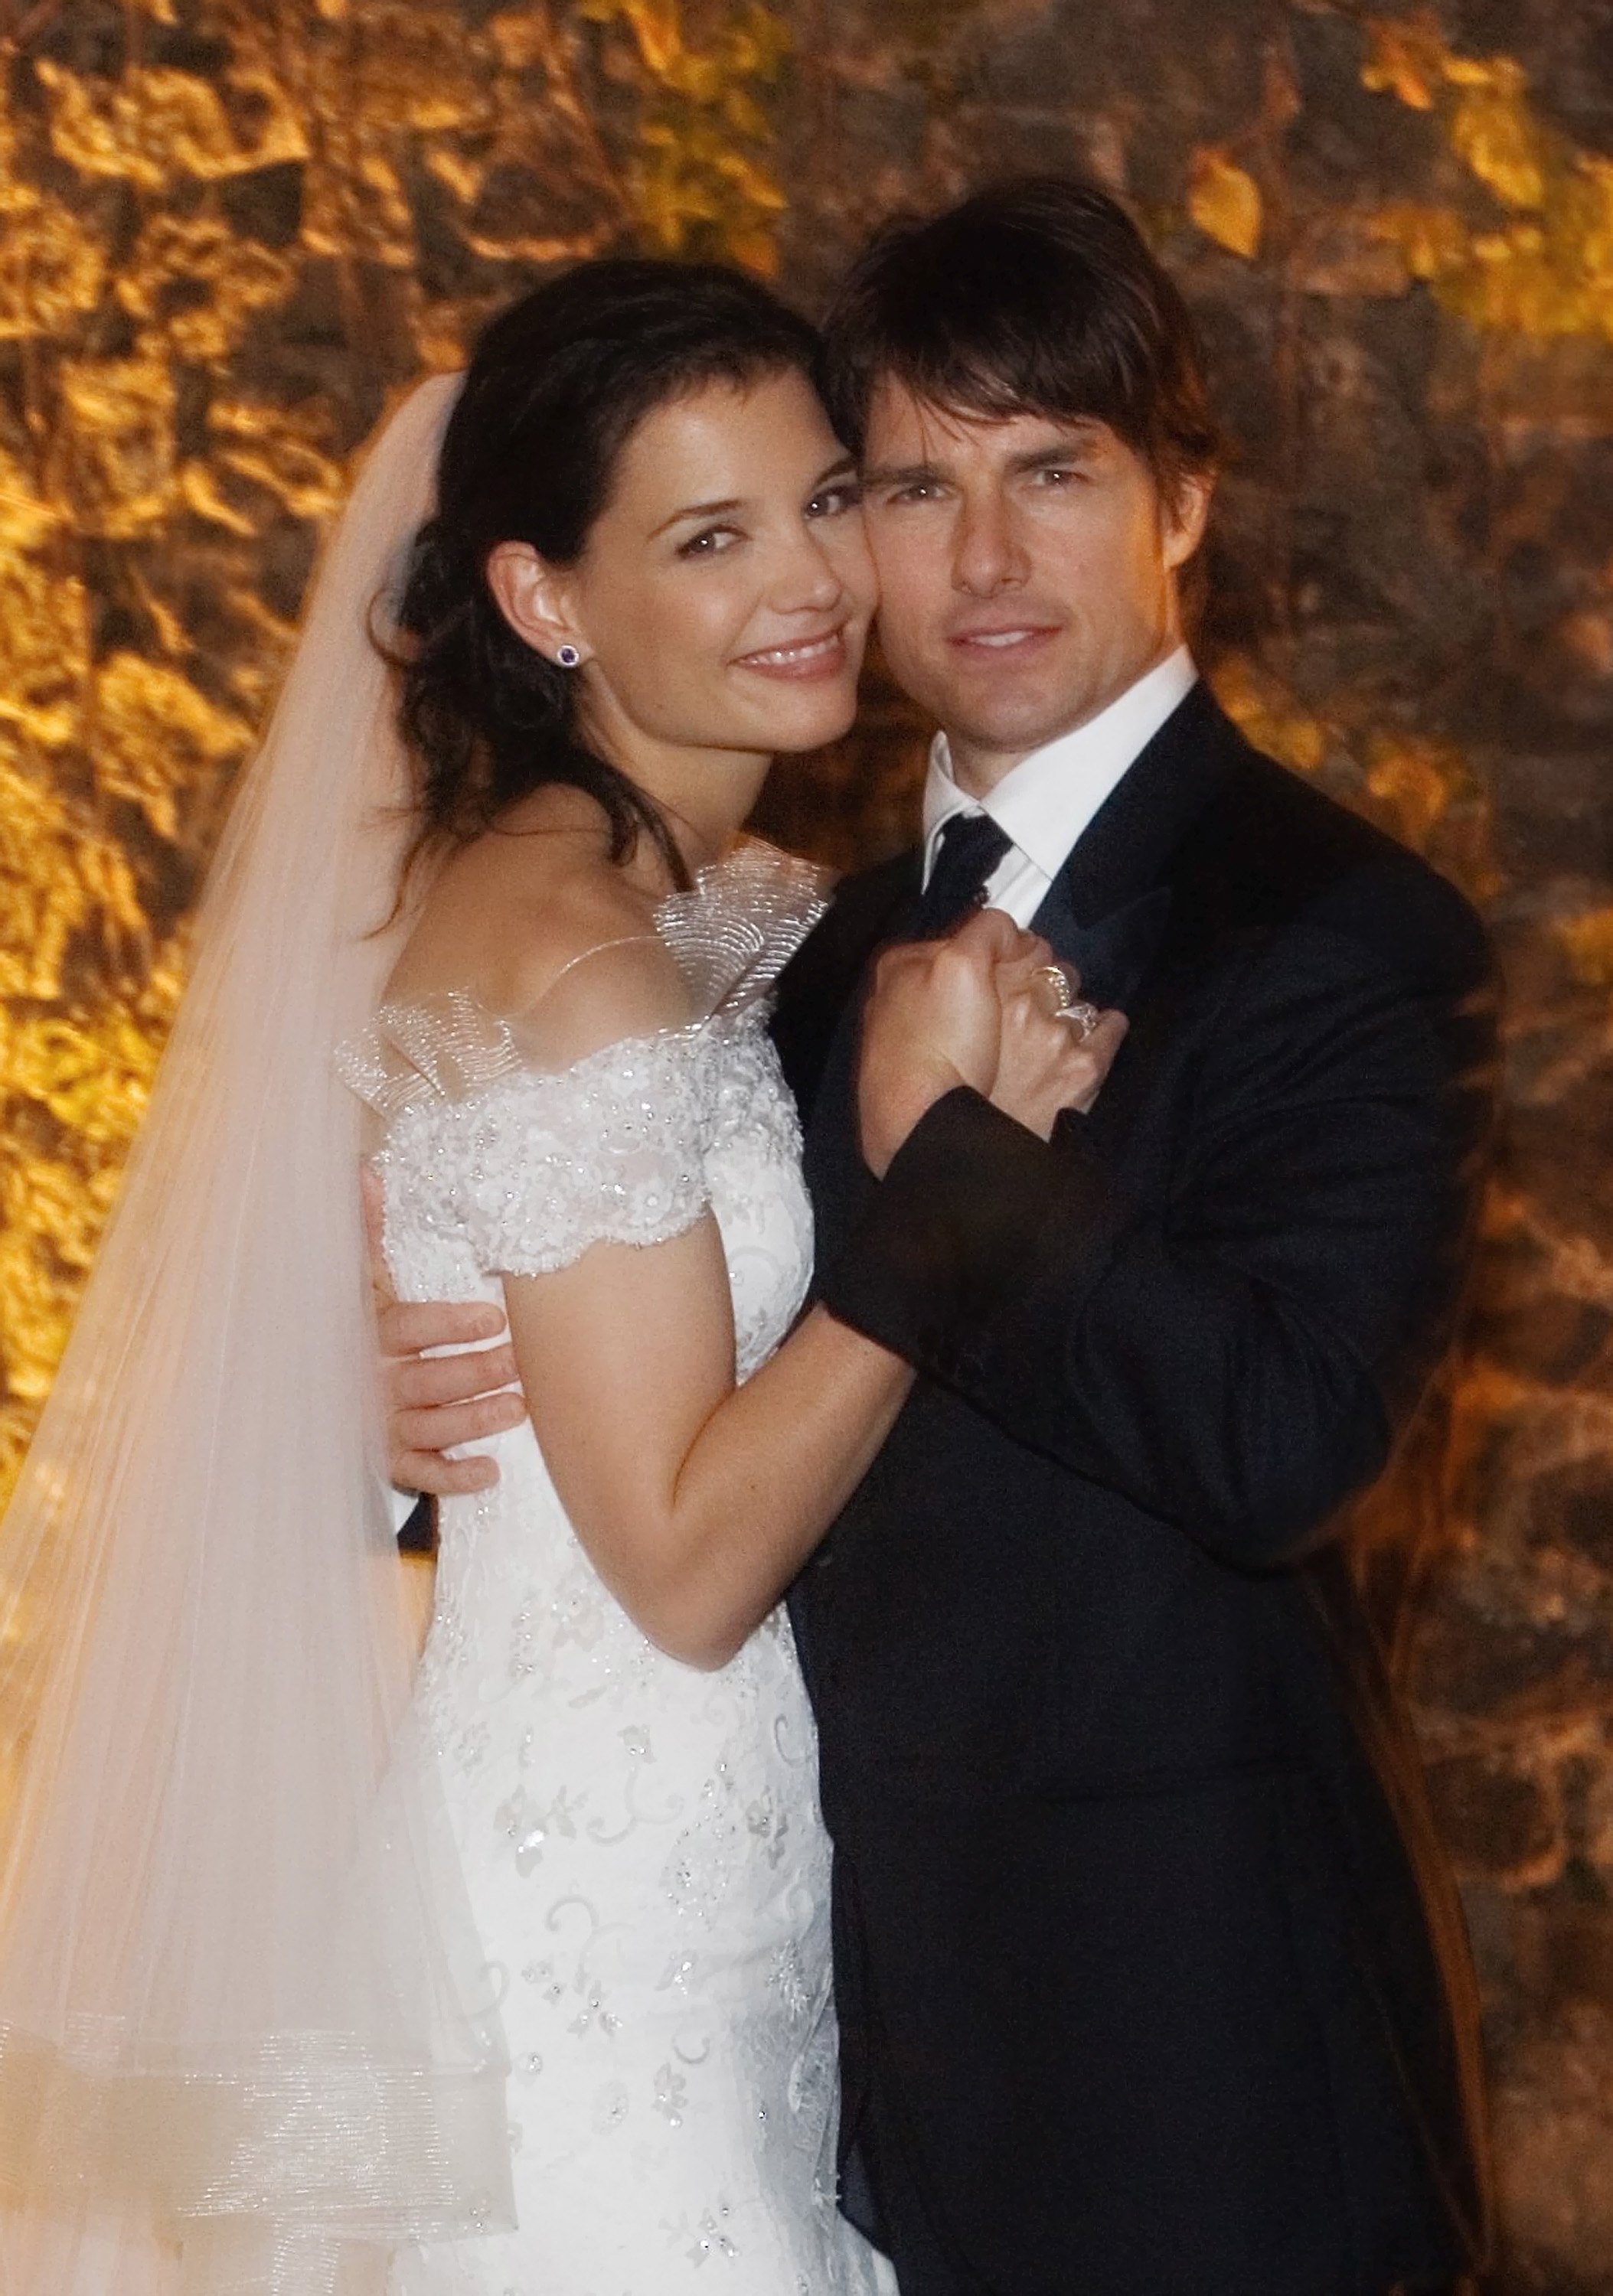 Tom Cruise and Katie Holmes in Italy in 2006 | Source: Getty Images